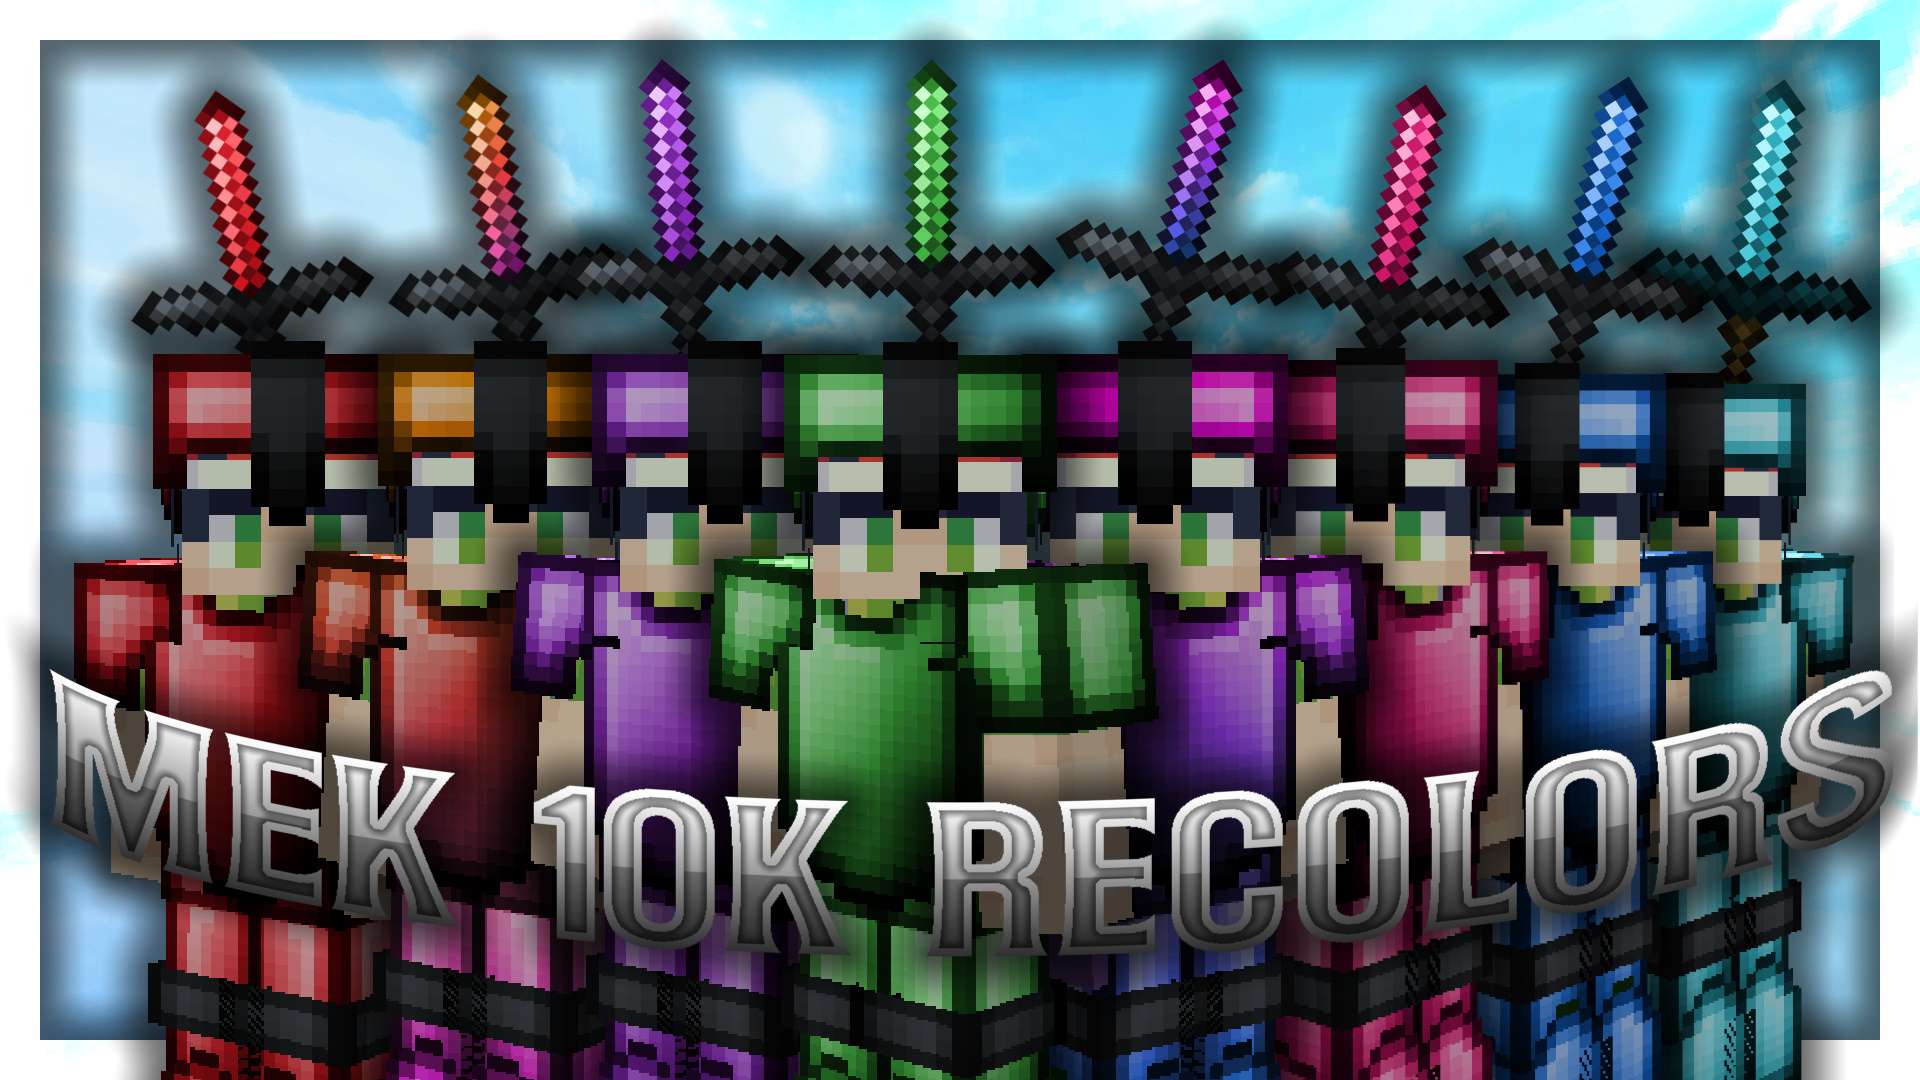 Gallery Banner for Mek 10k - Red on PvPRP